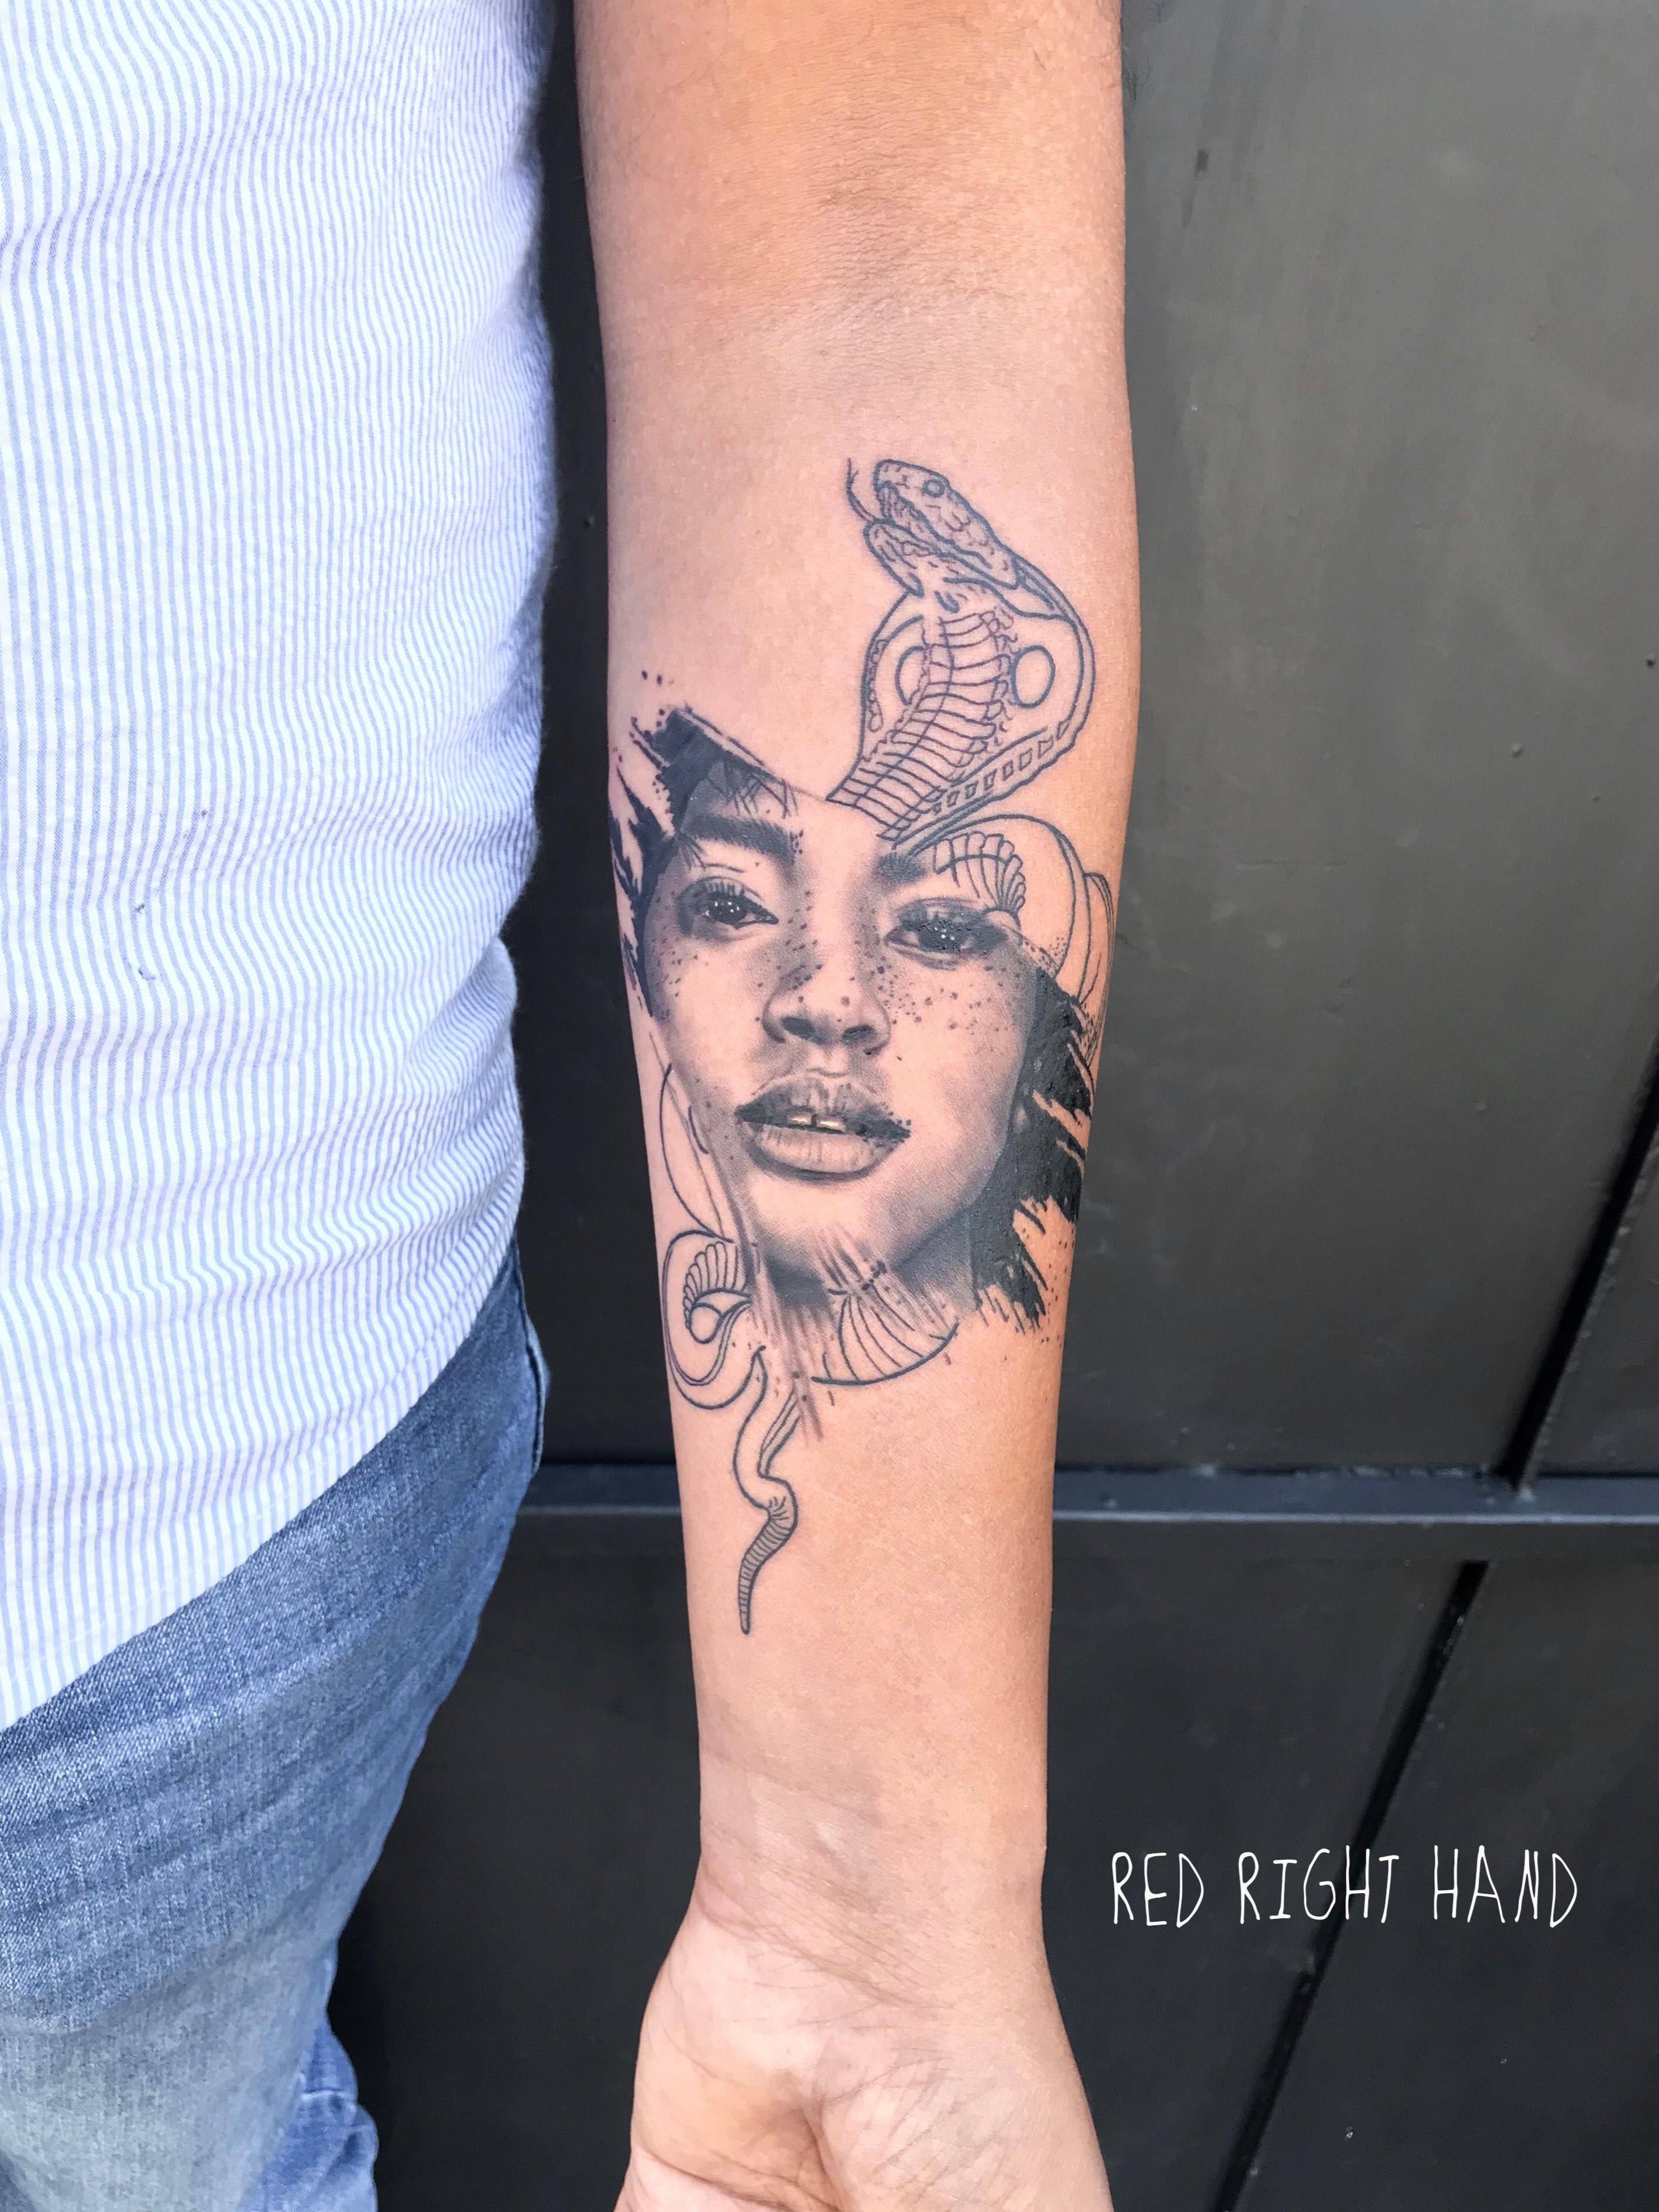 Tattoo uploaded by Red Right Hand Tattoos  Inspired by G Ghosts artwork   A cover up tattoo done at RED RIGHT HAND TATTOOS  Sri Lanka srilanka  colombo redrighthandtattoos  Tattoodo